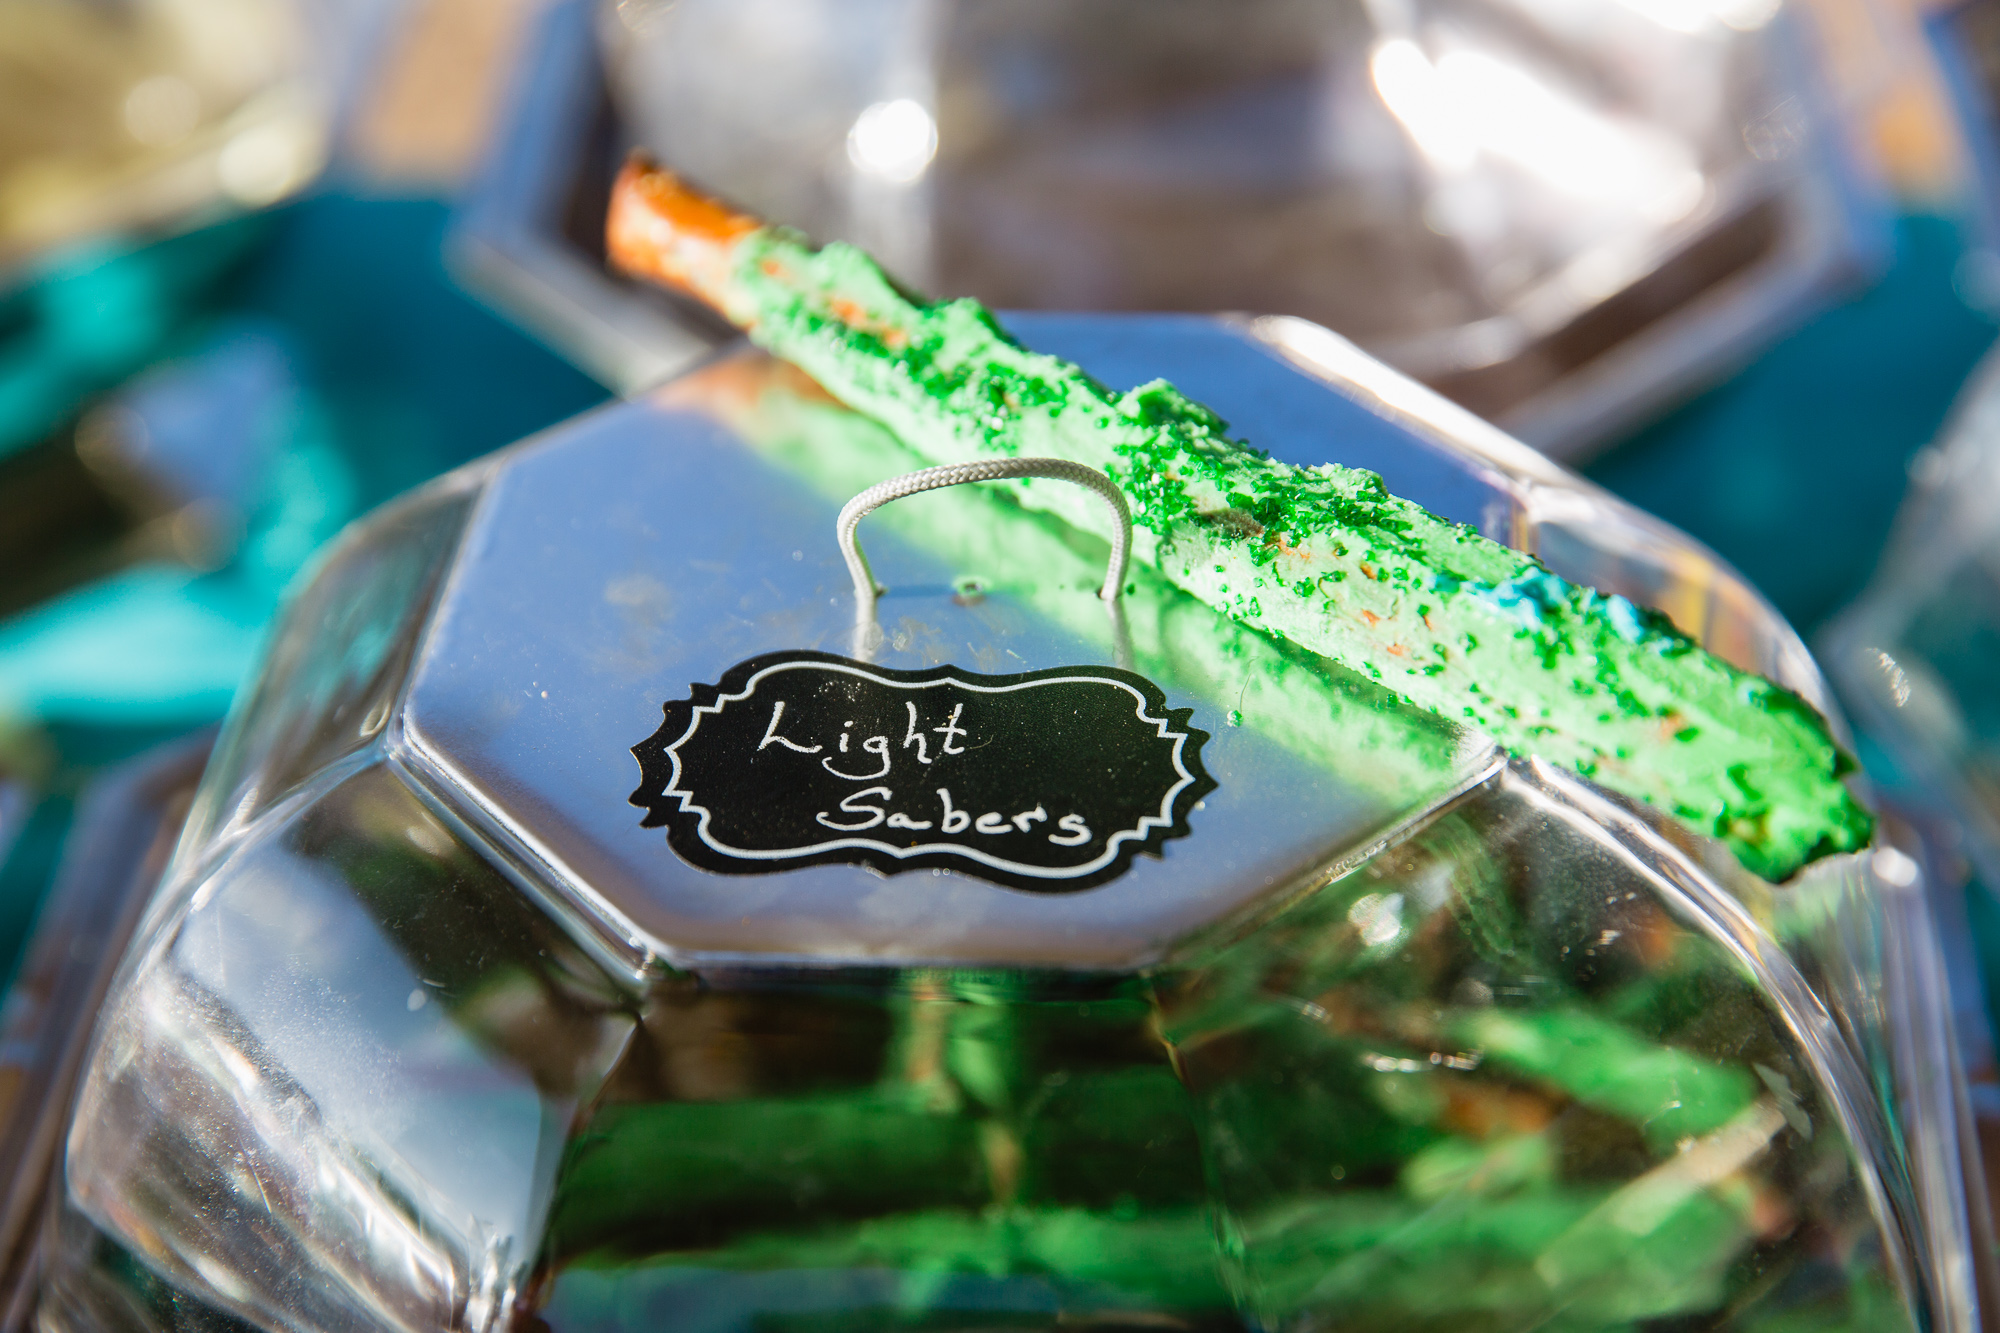 Star Wars themed snack table featuring Light Sabers for cocktail hour by Arizona wedding photographer PMA Photography.